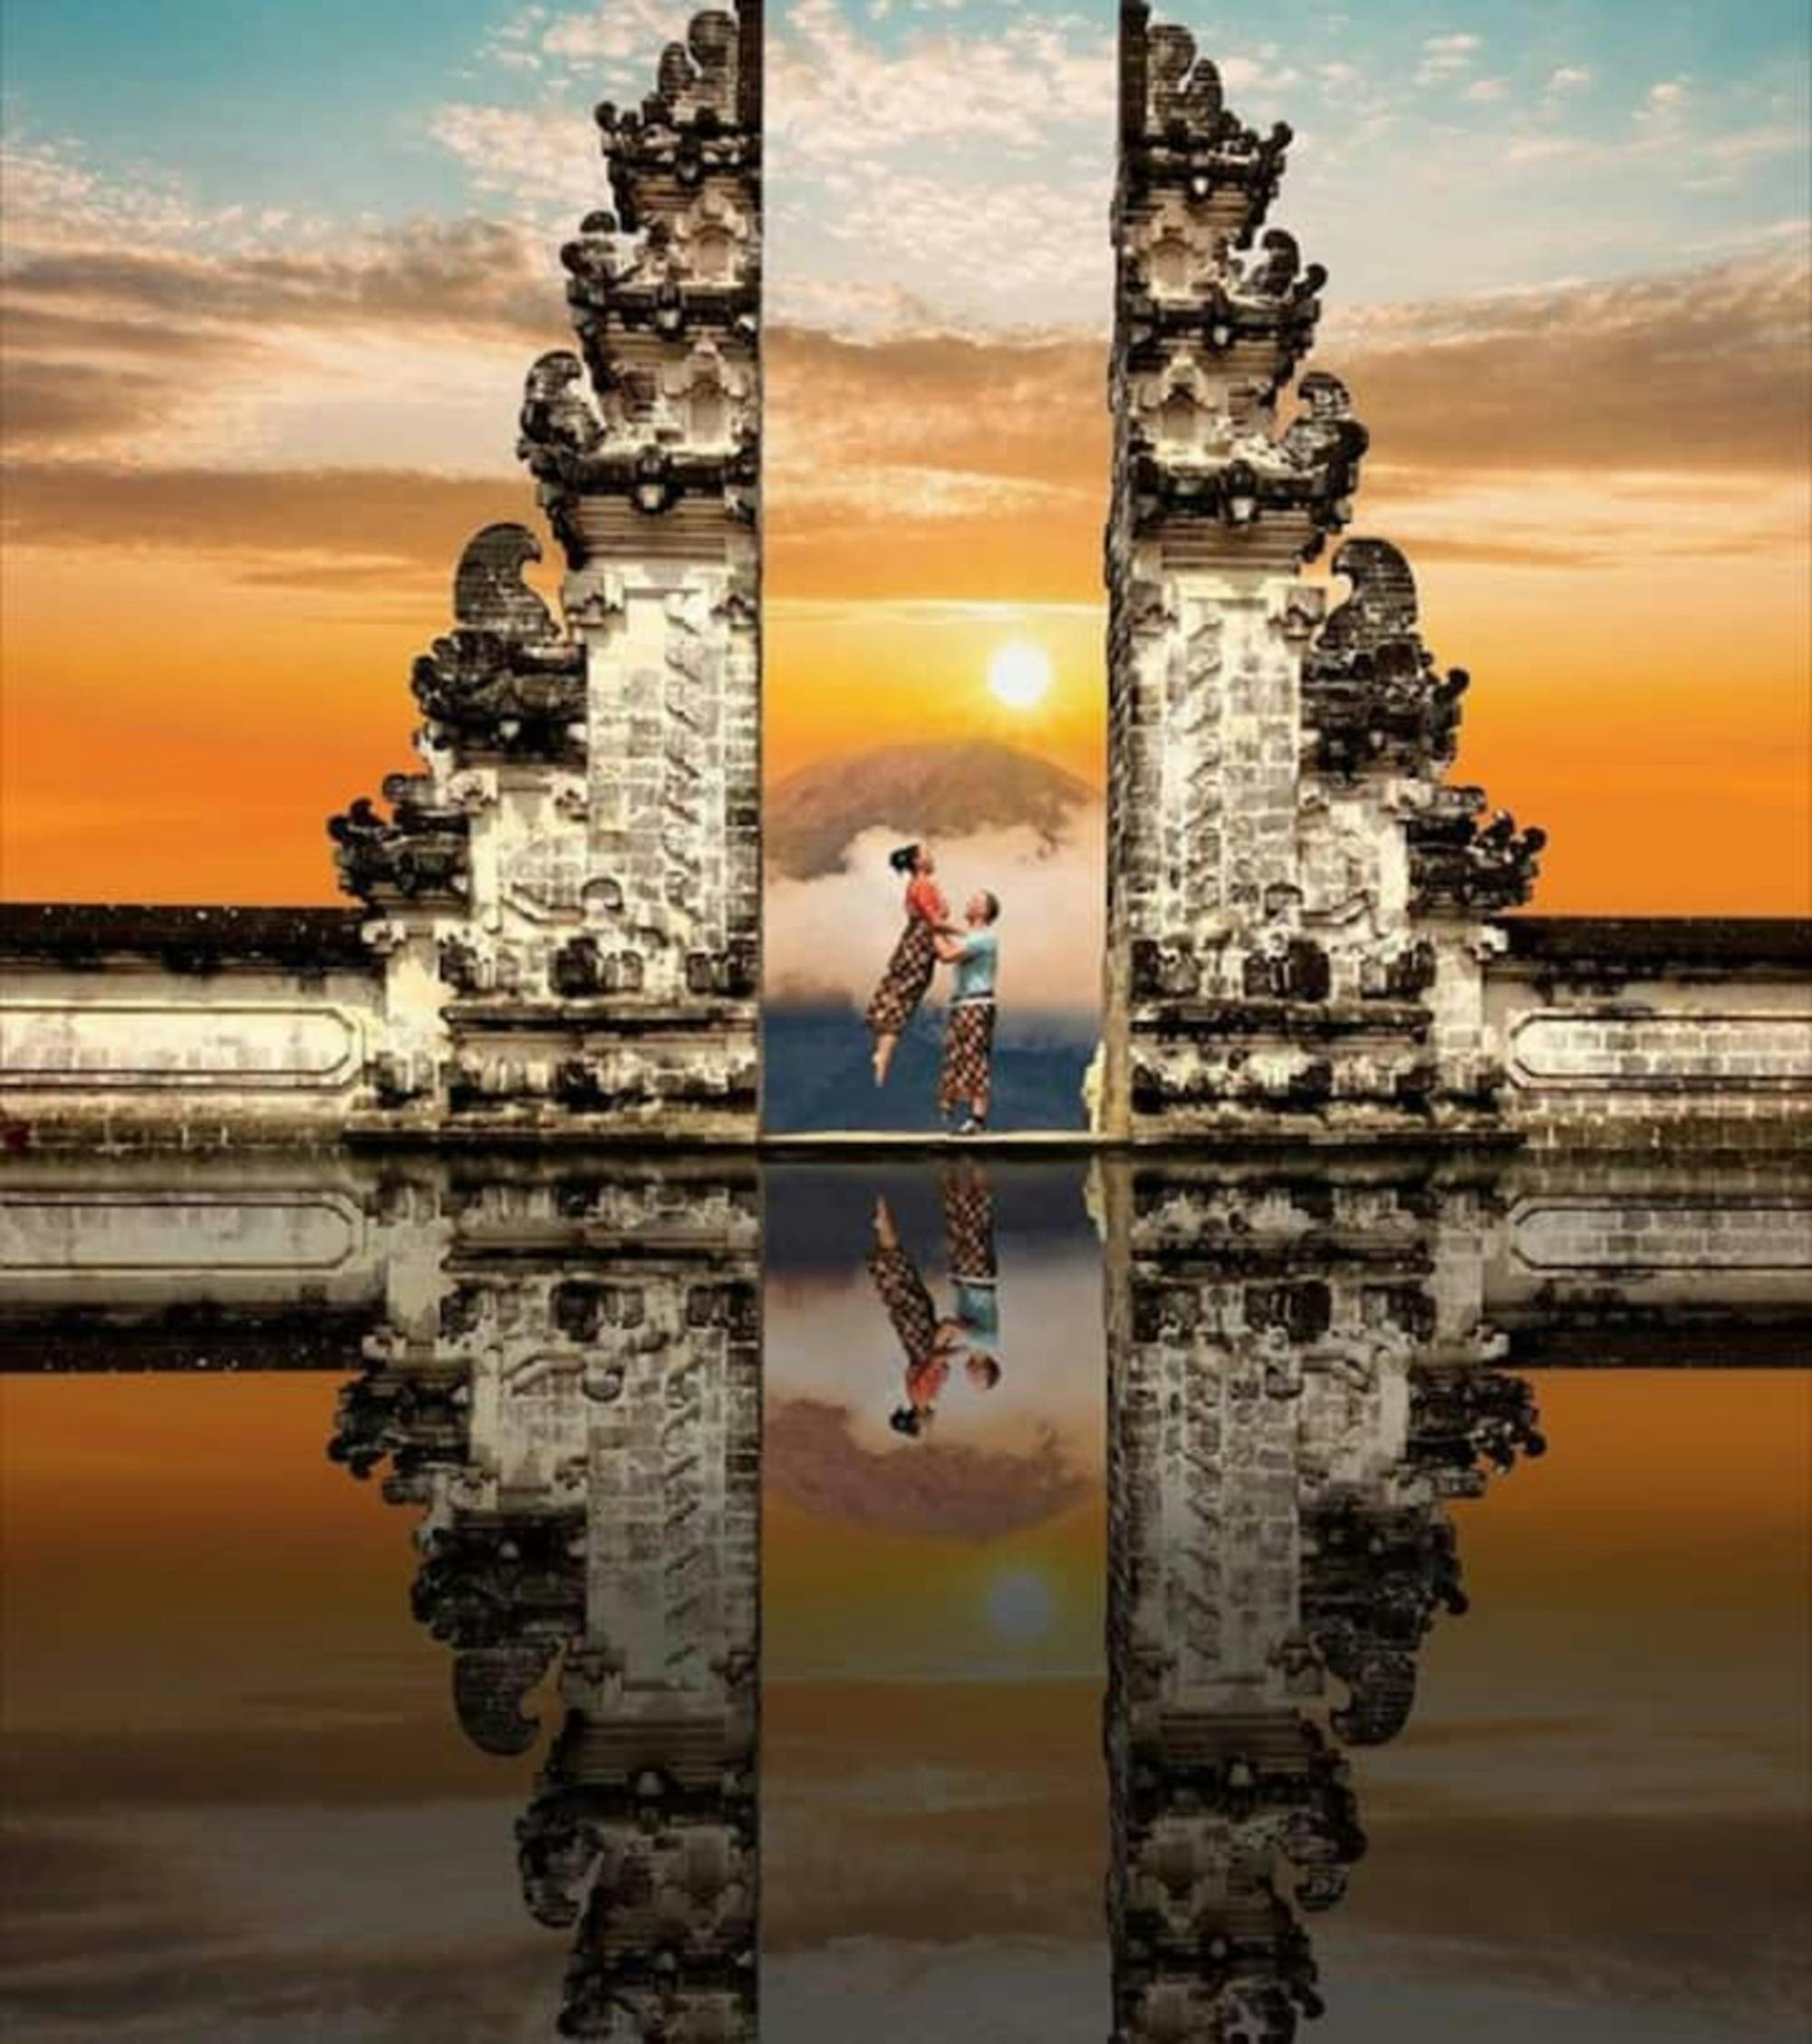 Ubud highlights and Gate of Heaven private 1-day tour